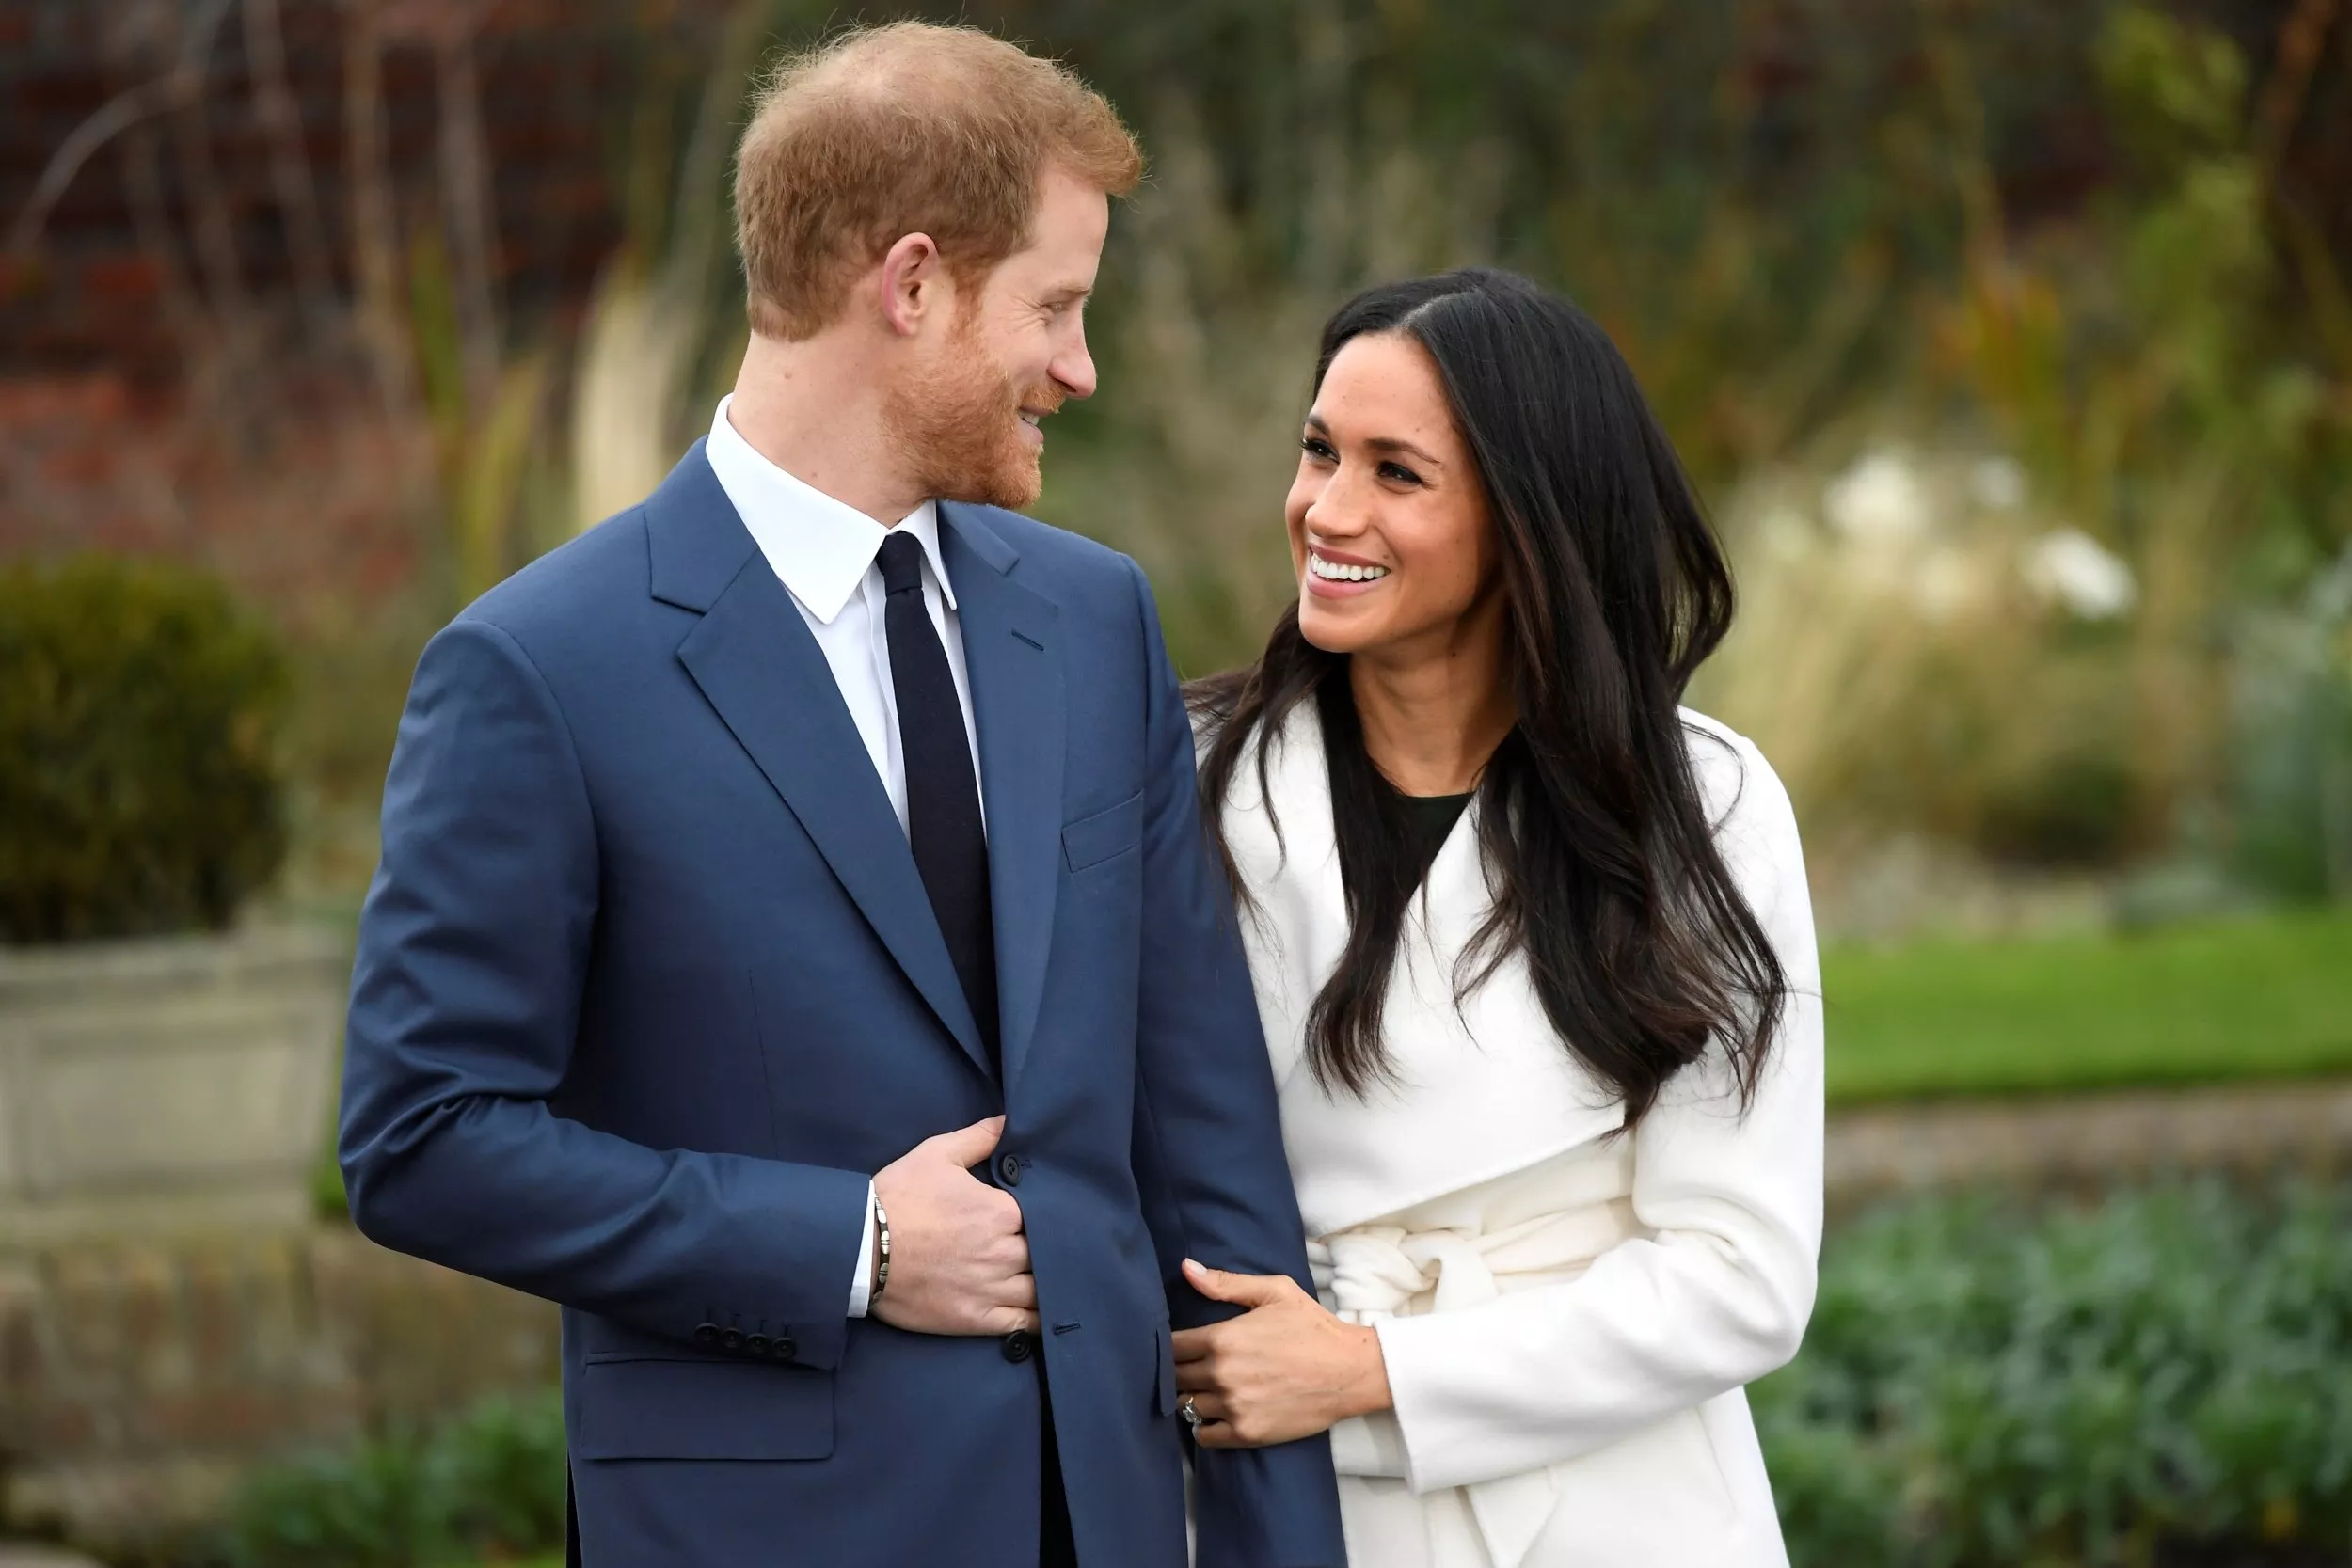 Prince Harrys Engagement Its Still Rare for a White Man to Marry a Nonwhite Woman in the U.K.